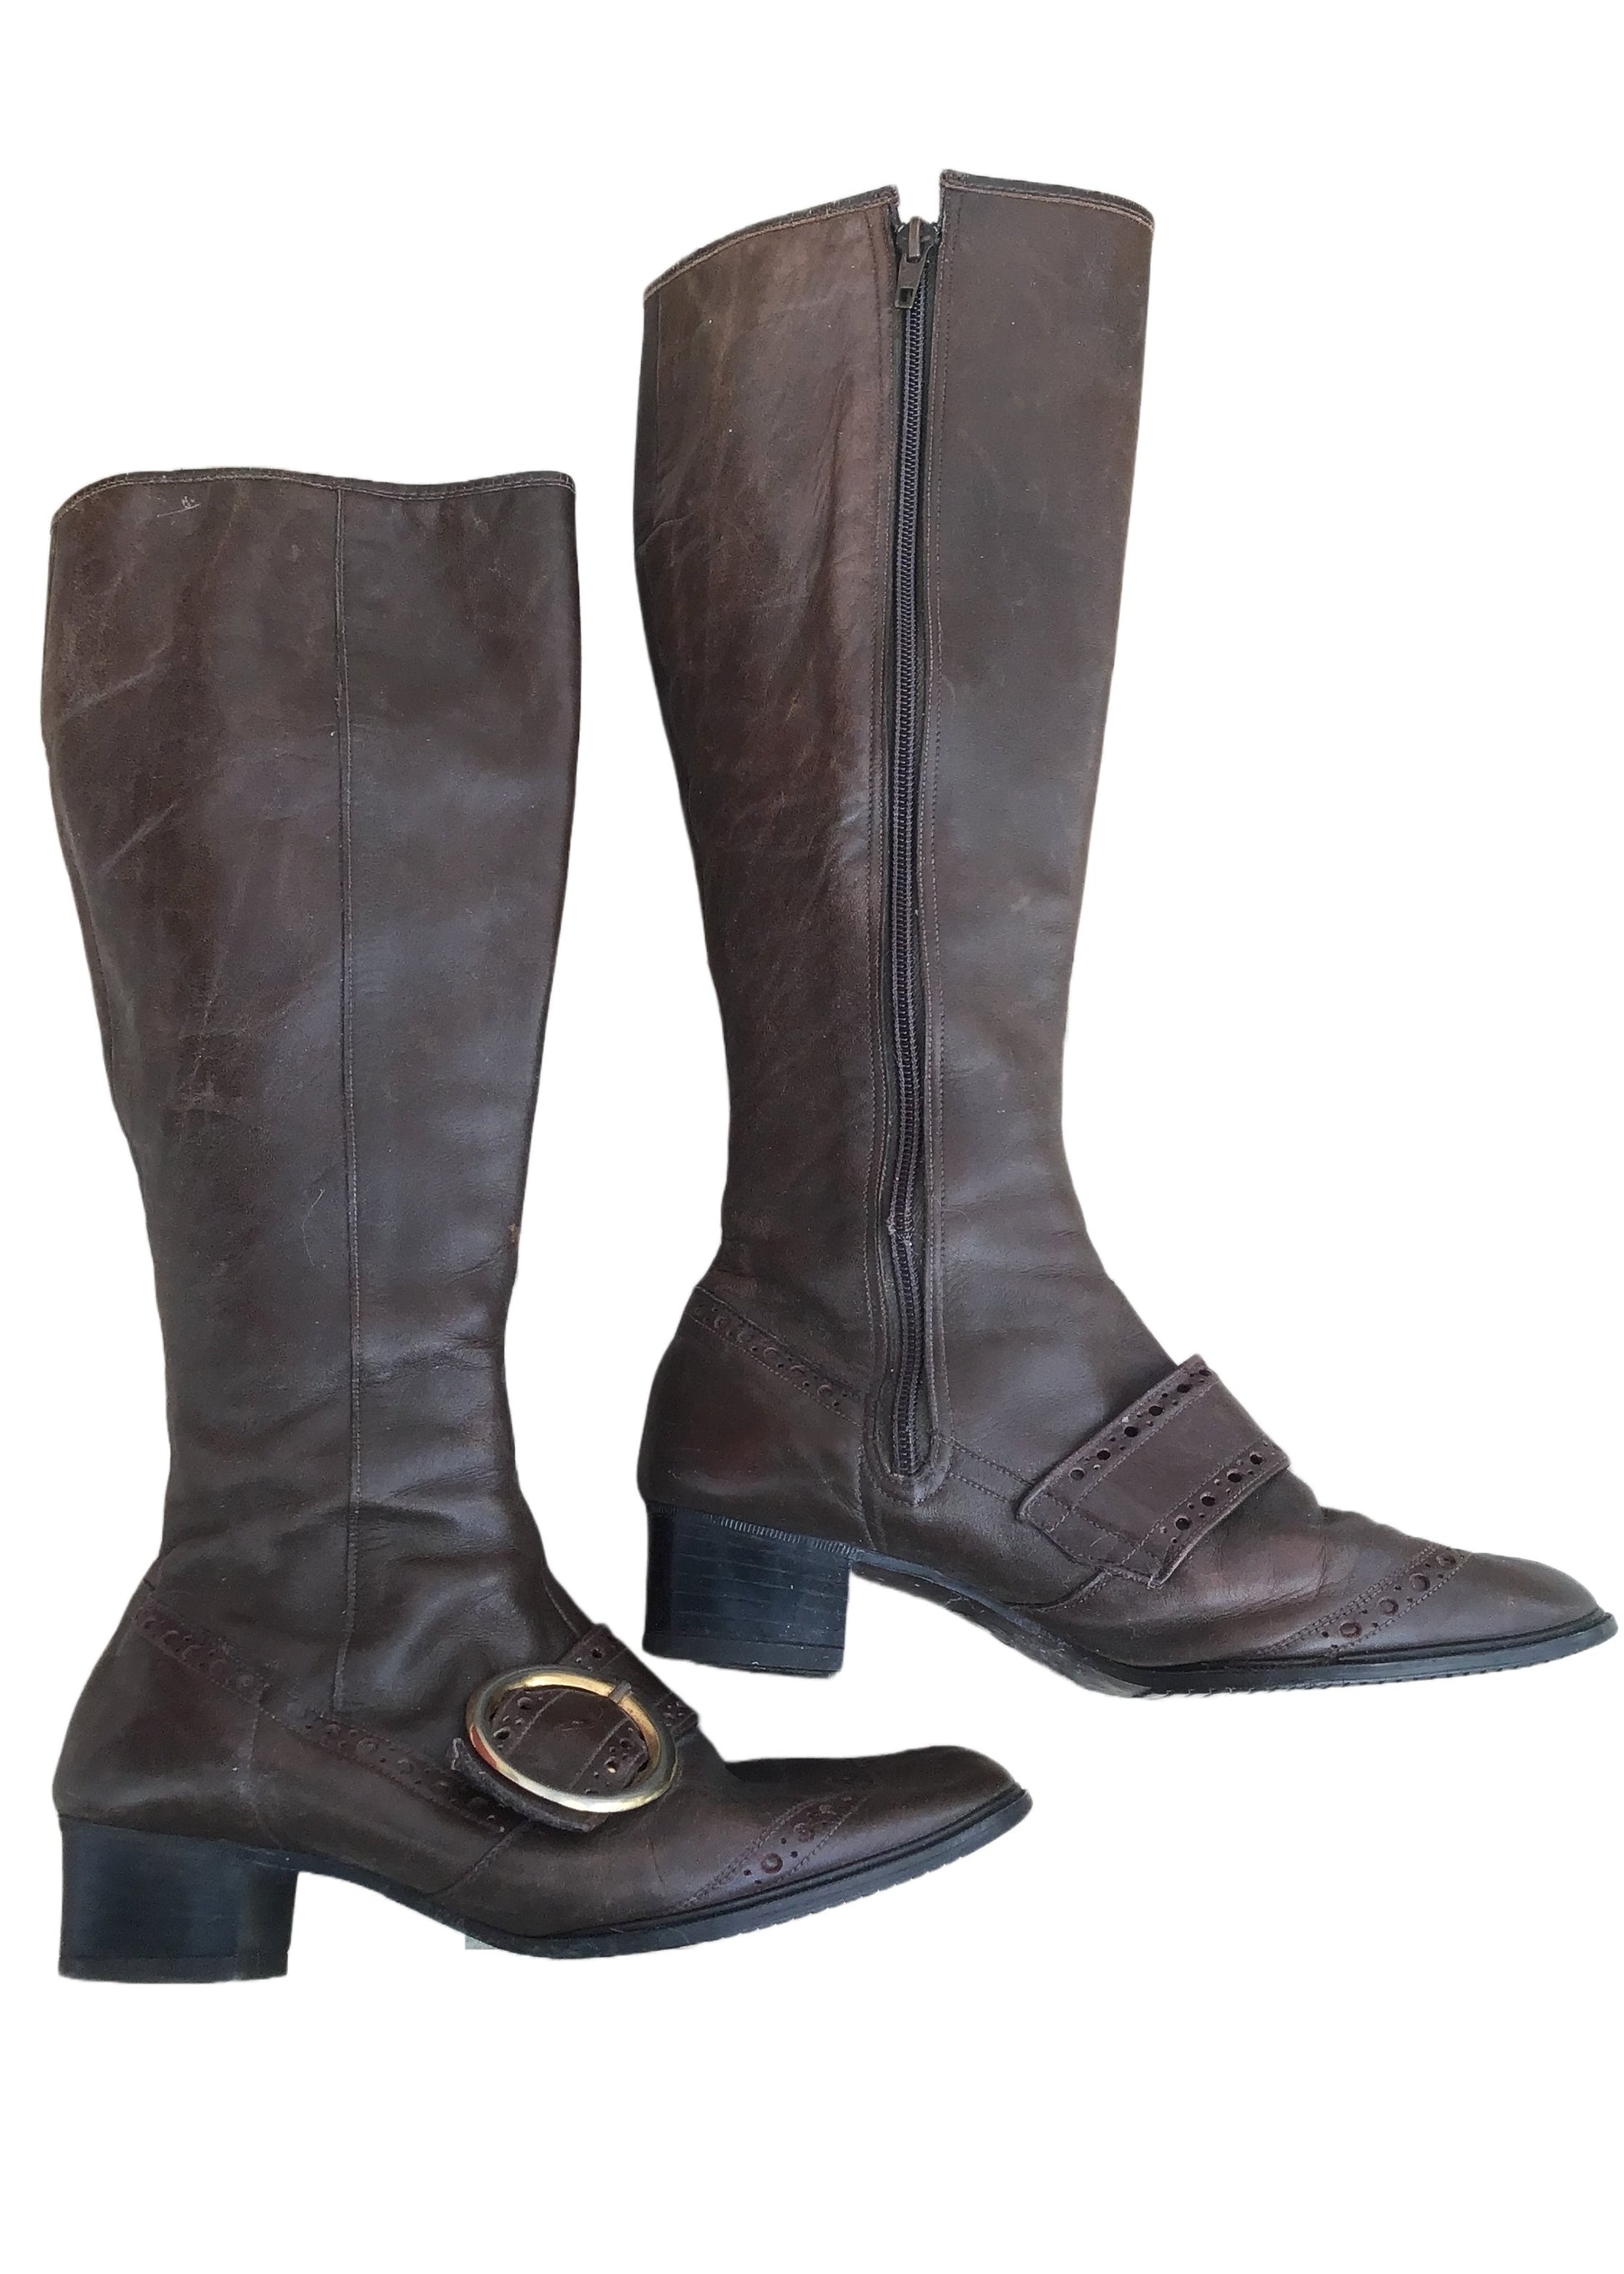 brown faux leather 1960s gogo boots, knee high boots with buckle and strap detail in a brogue design